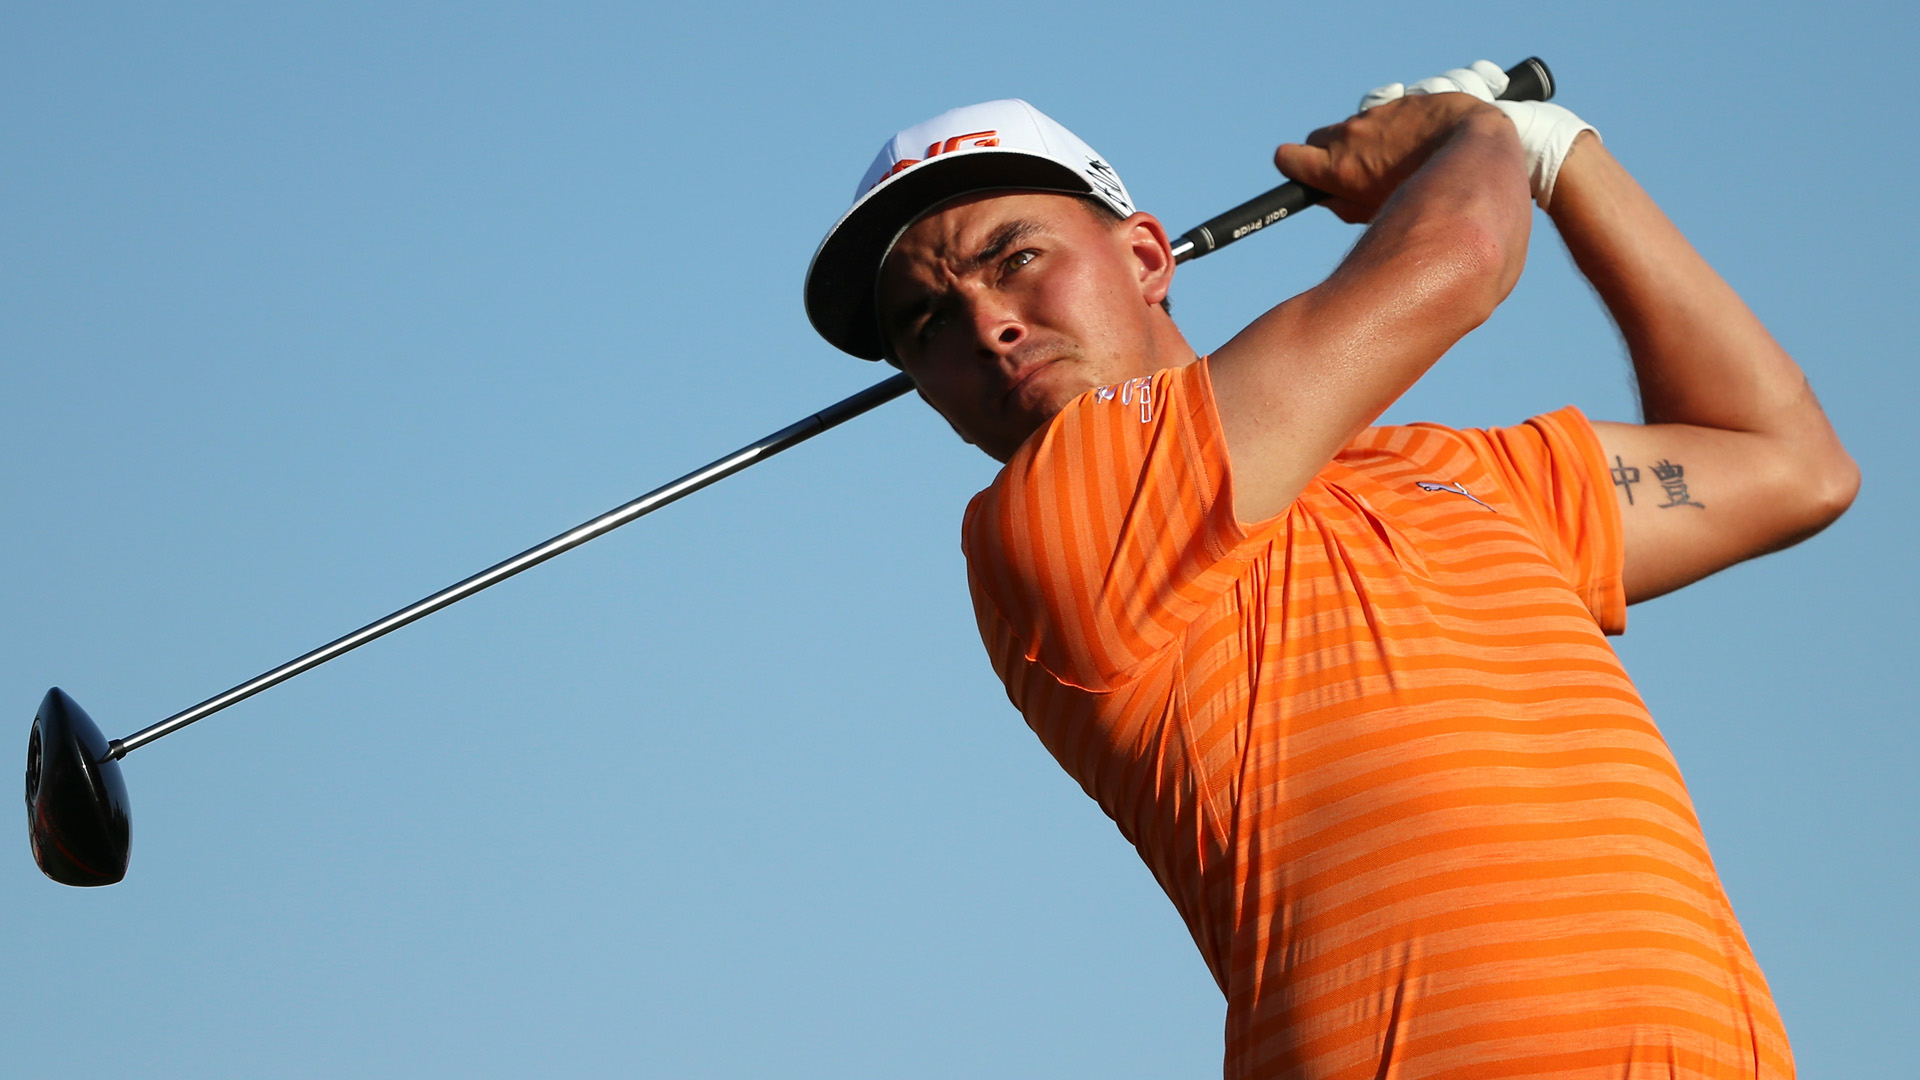 Rickie Fowler claims one shot win at the Abu Dhabi Golf